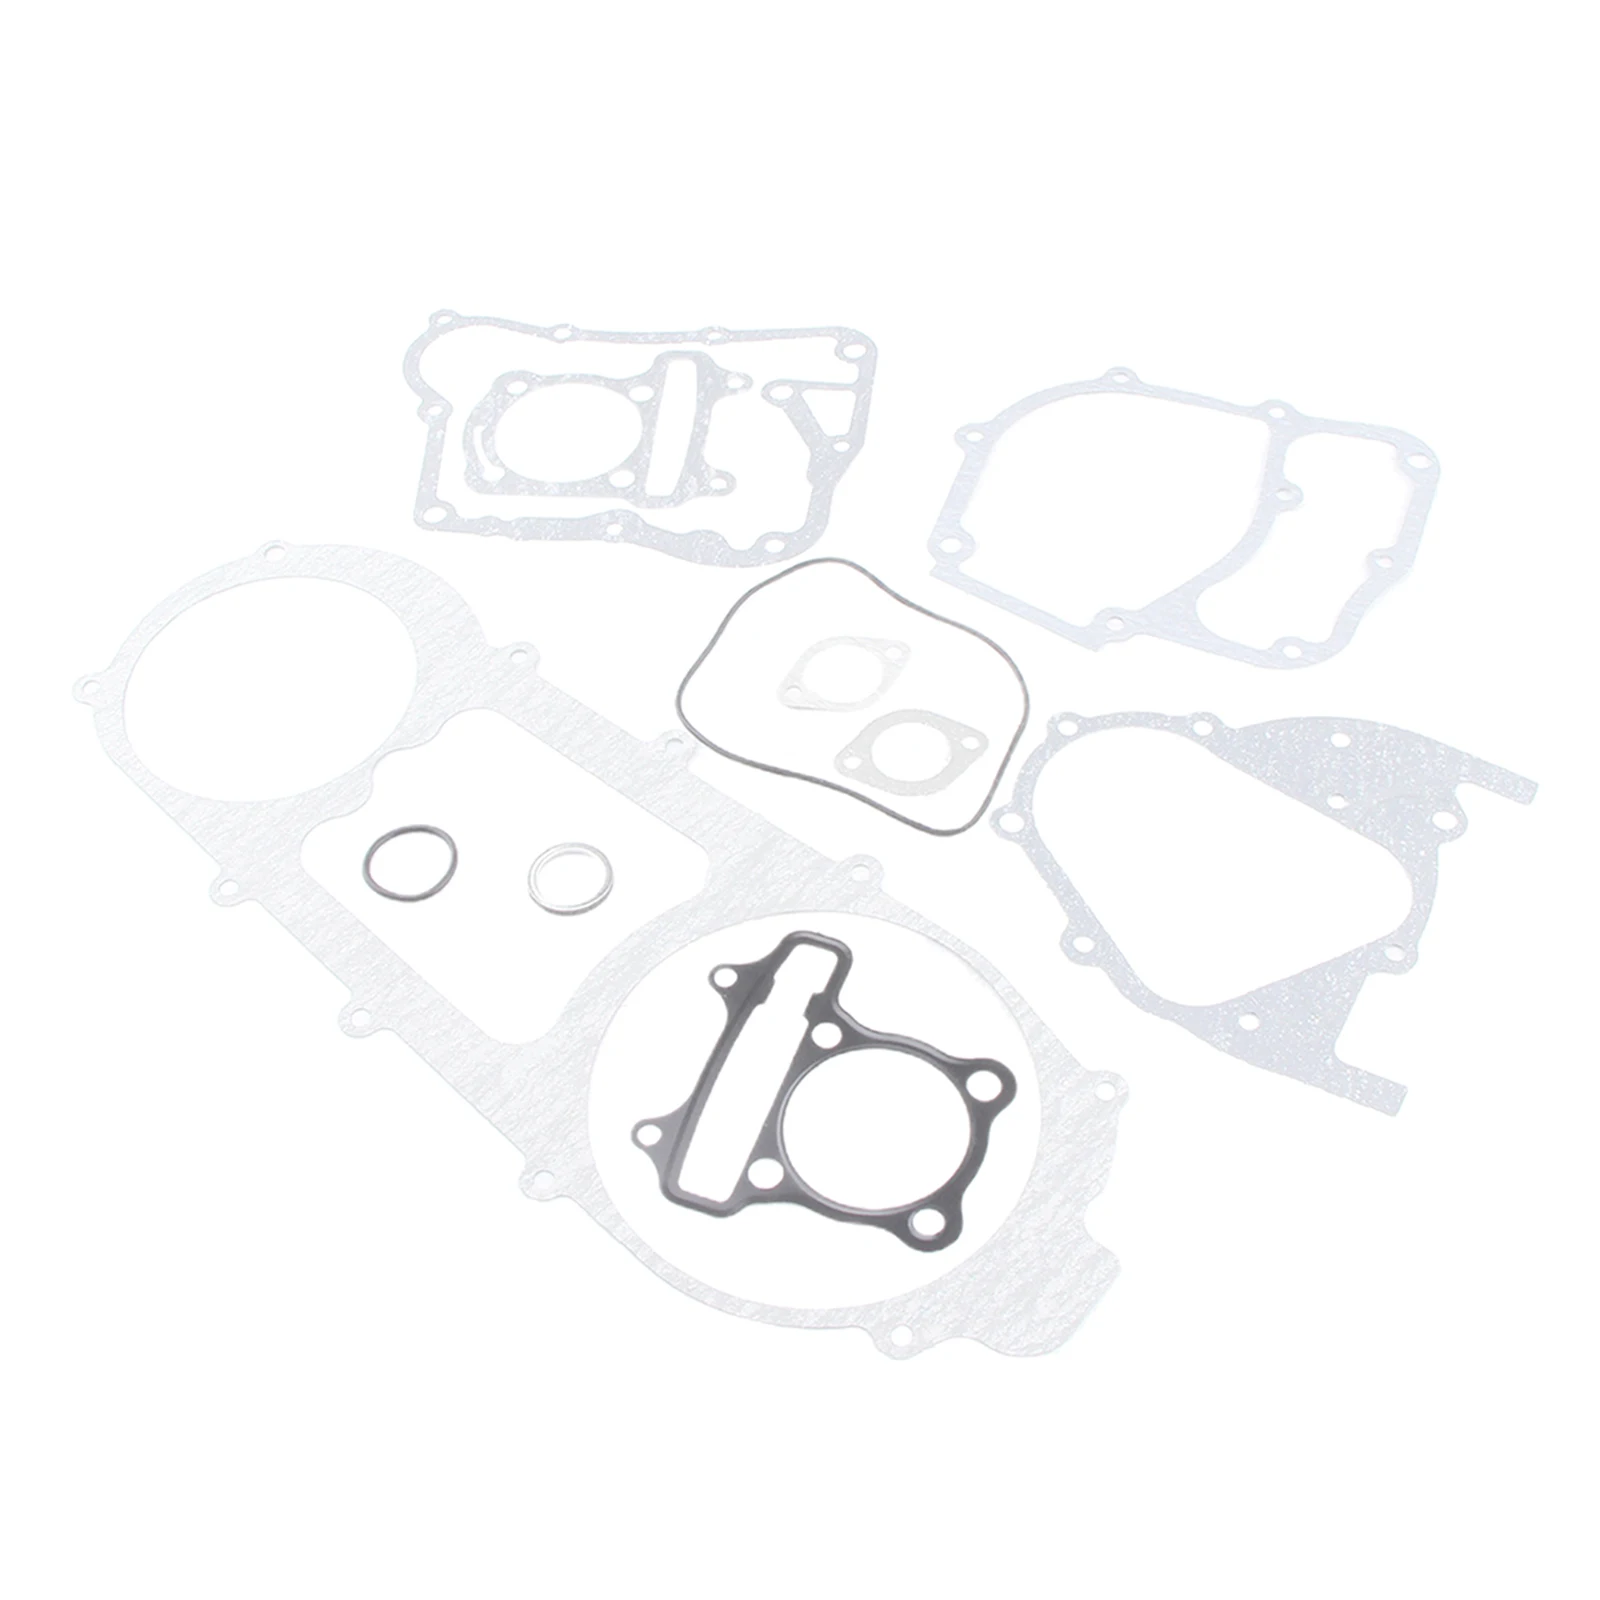 Complete Long Case Engine Gasket Set for GY6 150cc Moped Scooters ATVsComplete Gasket Set